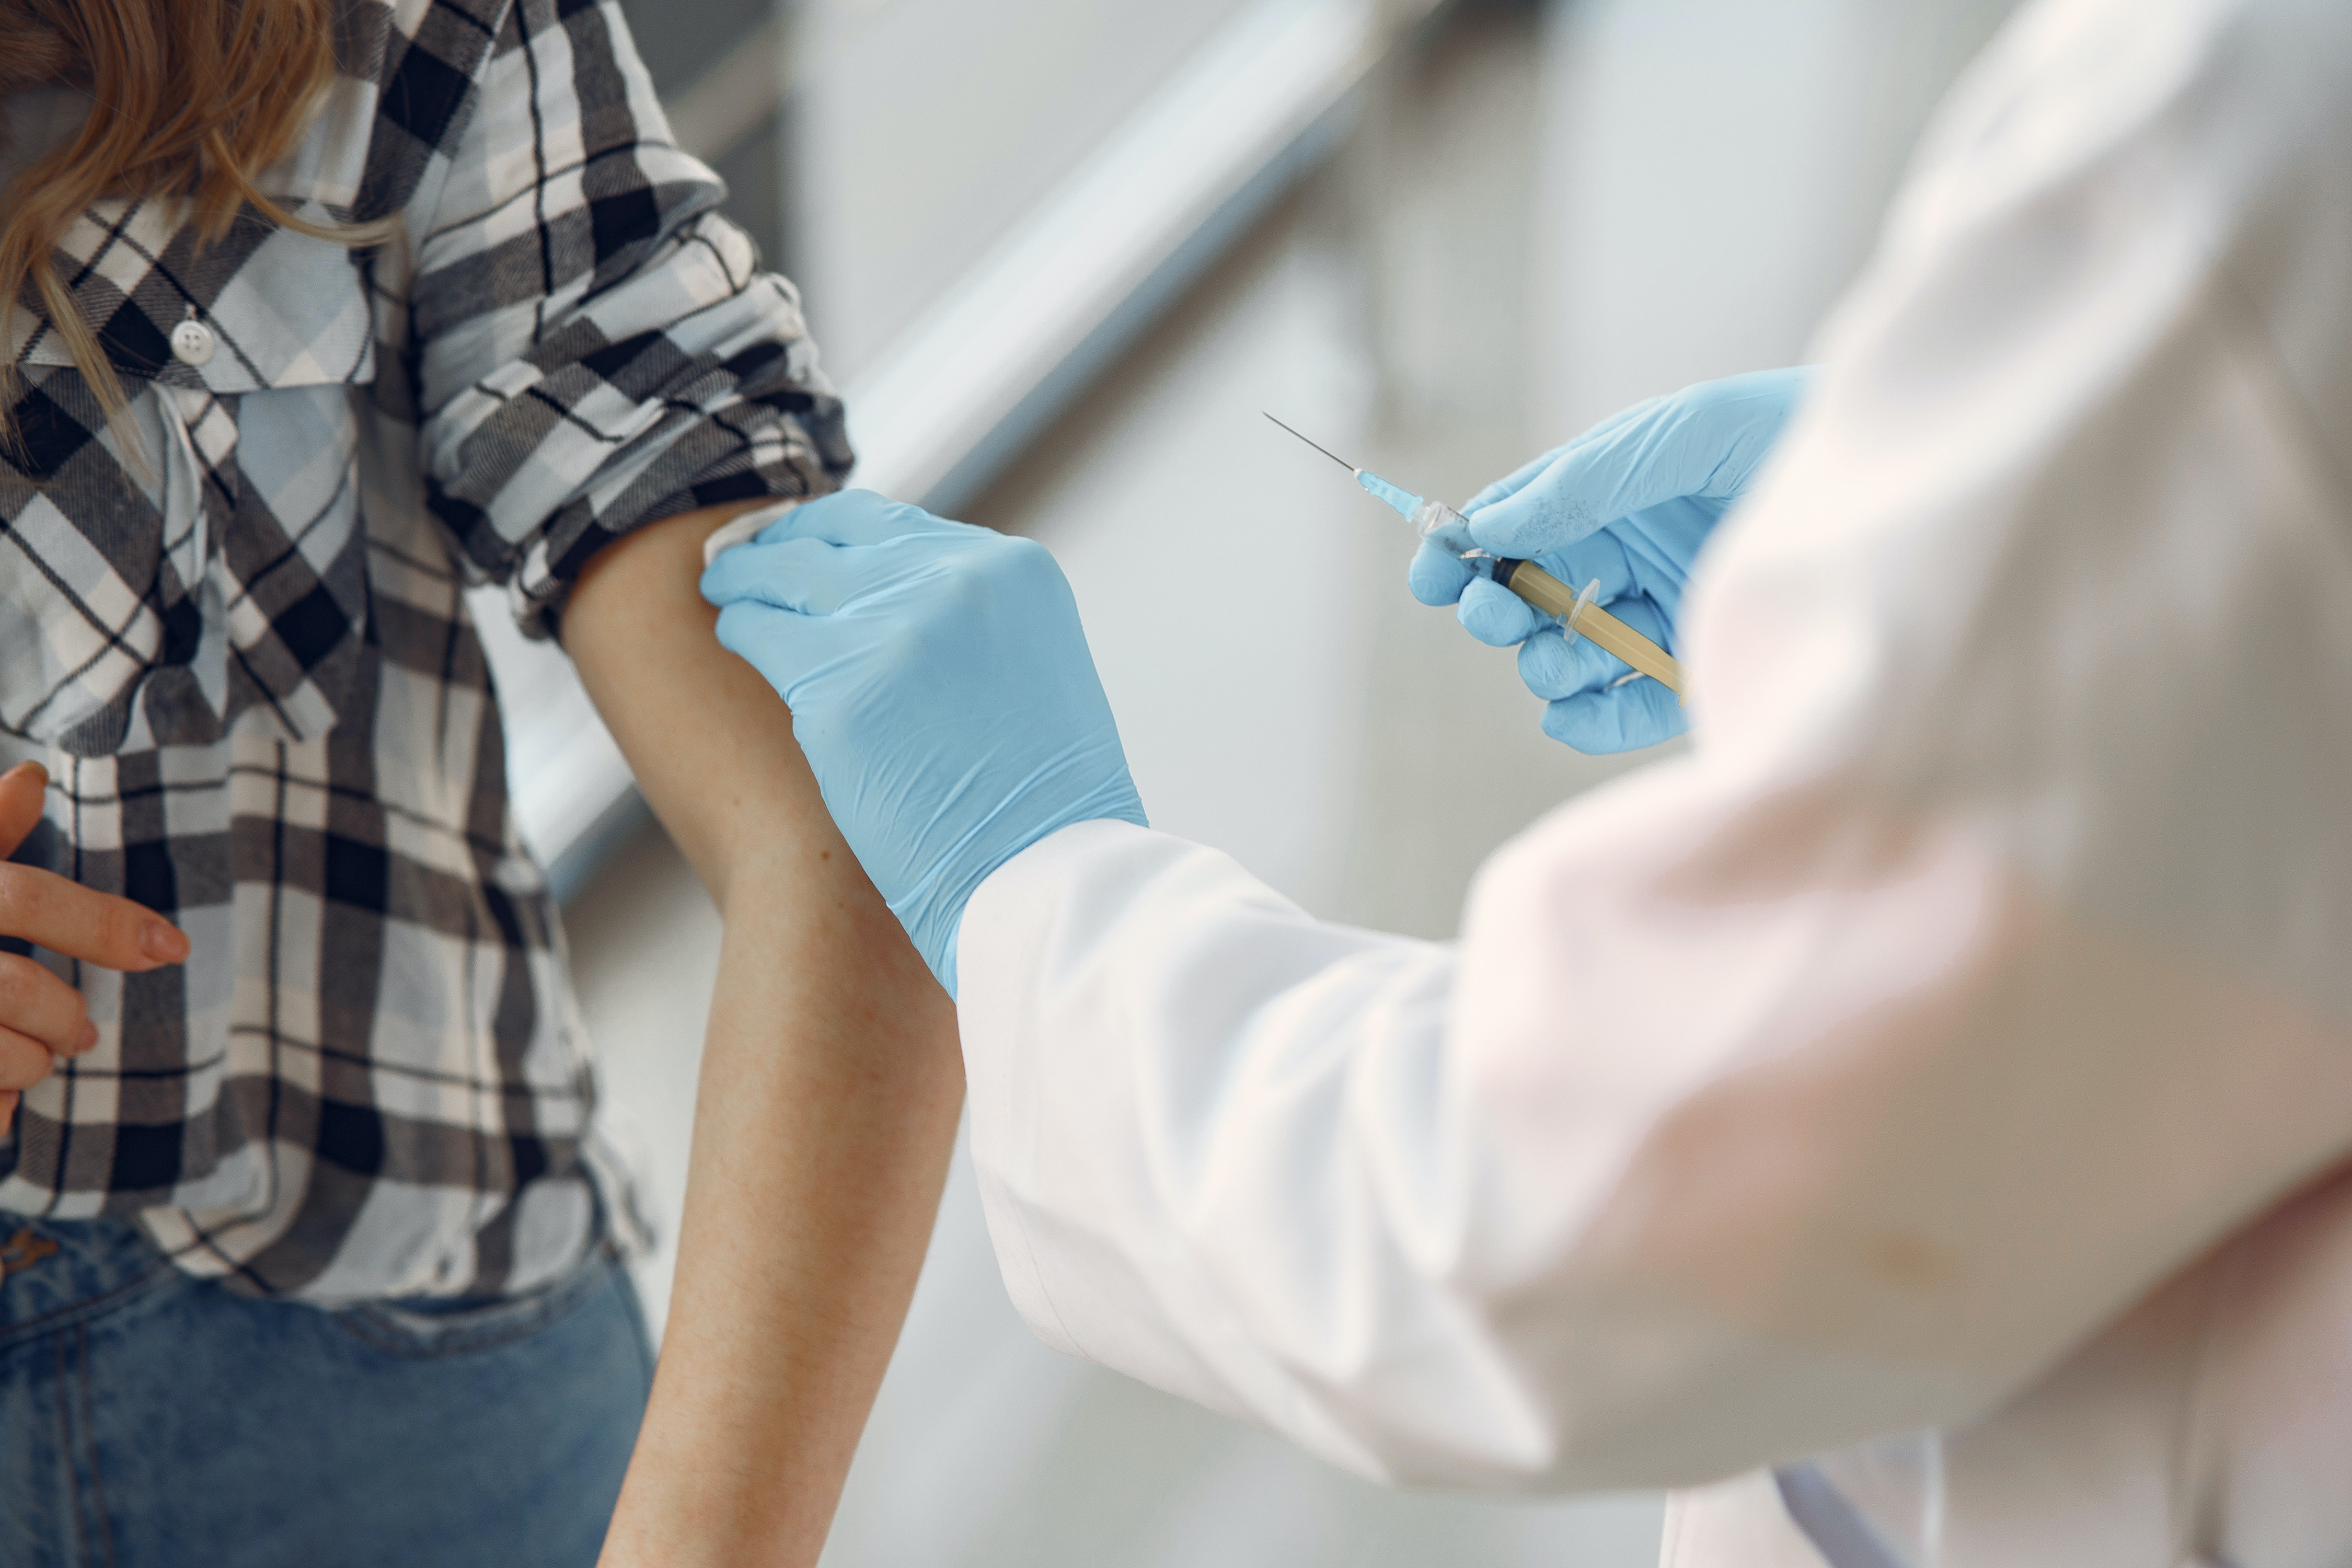 an image of a person getting a shot or vaccine, representing the COVID-19 vaccine